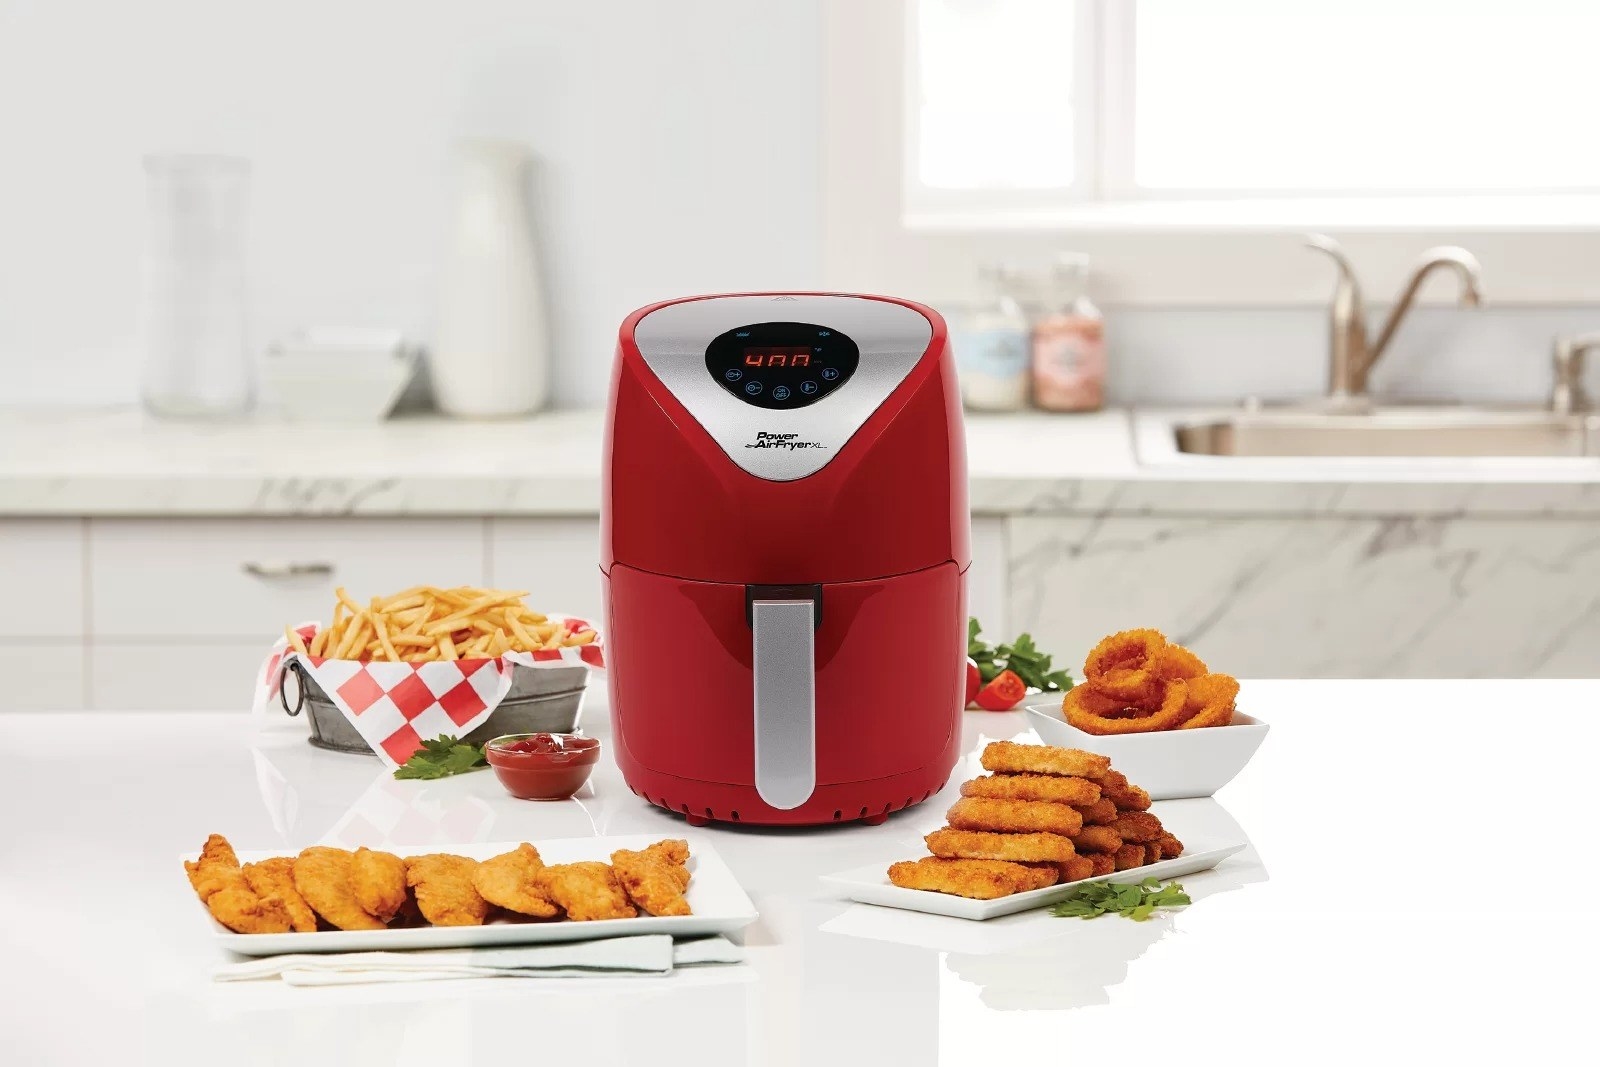 the red air fryer